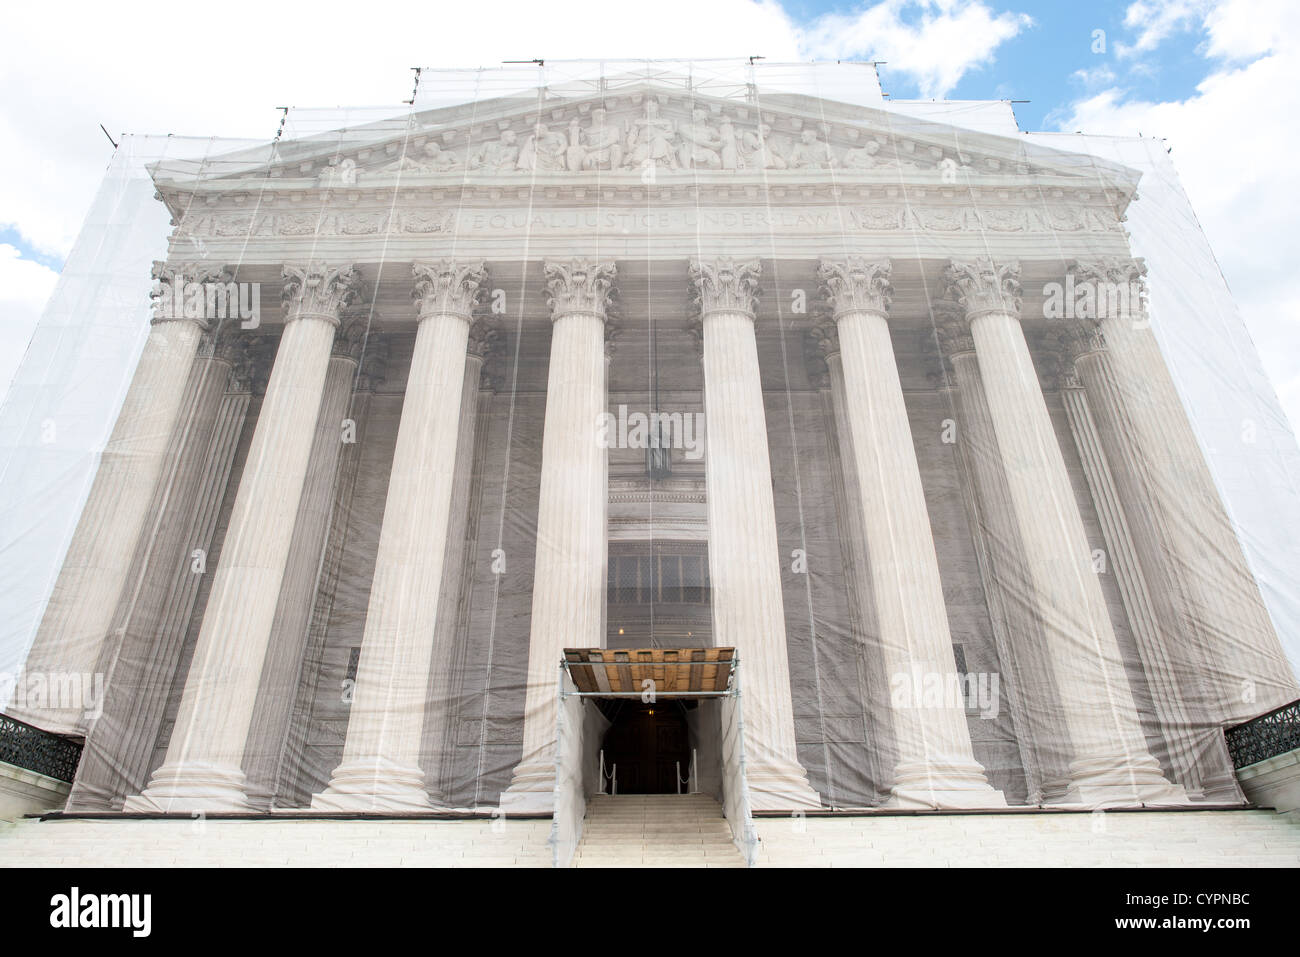 WASHINGTON DC, USA - While the US Supreme Court building is undergoing renovations, it is covered with a light scrim over the scaffolding that shows an image of the building as it was before the repairs and without the scaffolding. Stock Photo